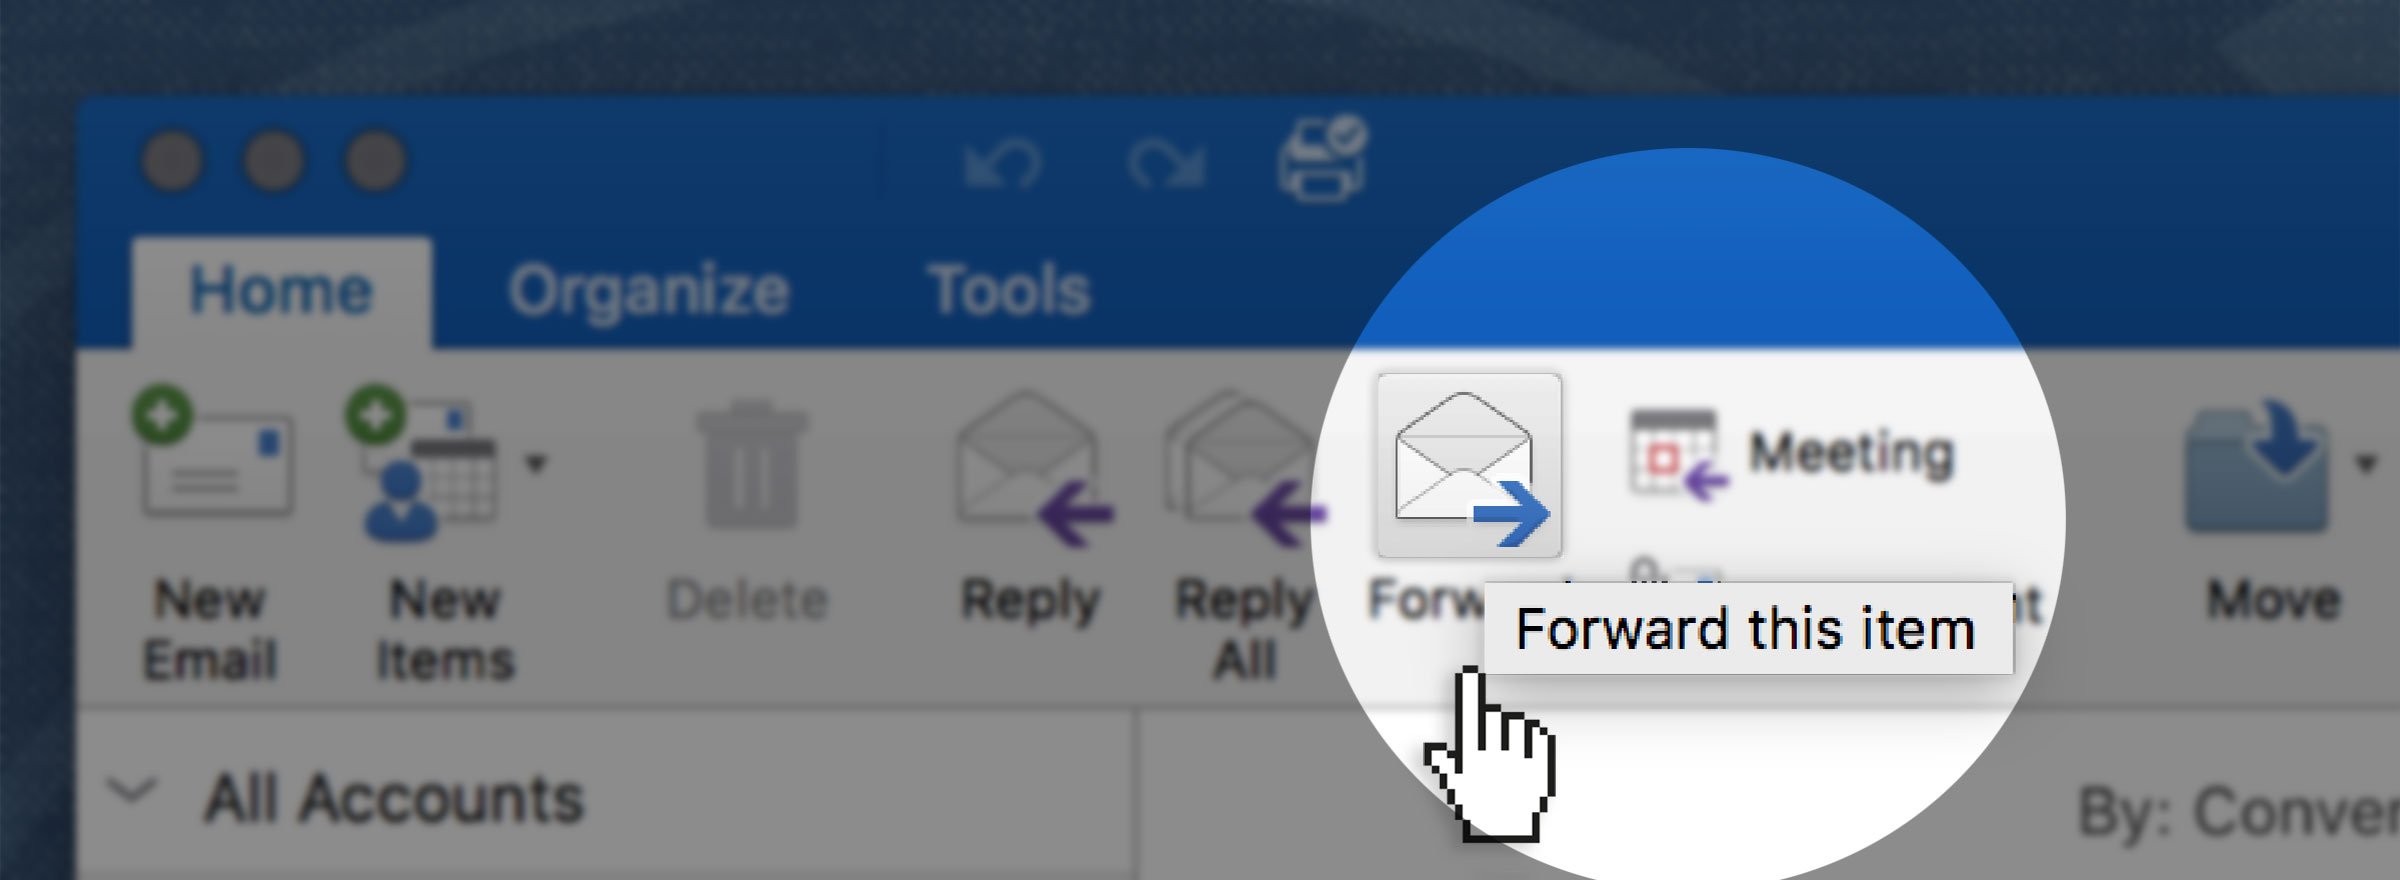 screenshot of a hand about to click on an envelope icon to forward something